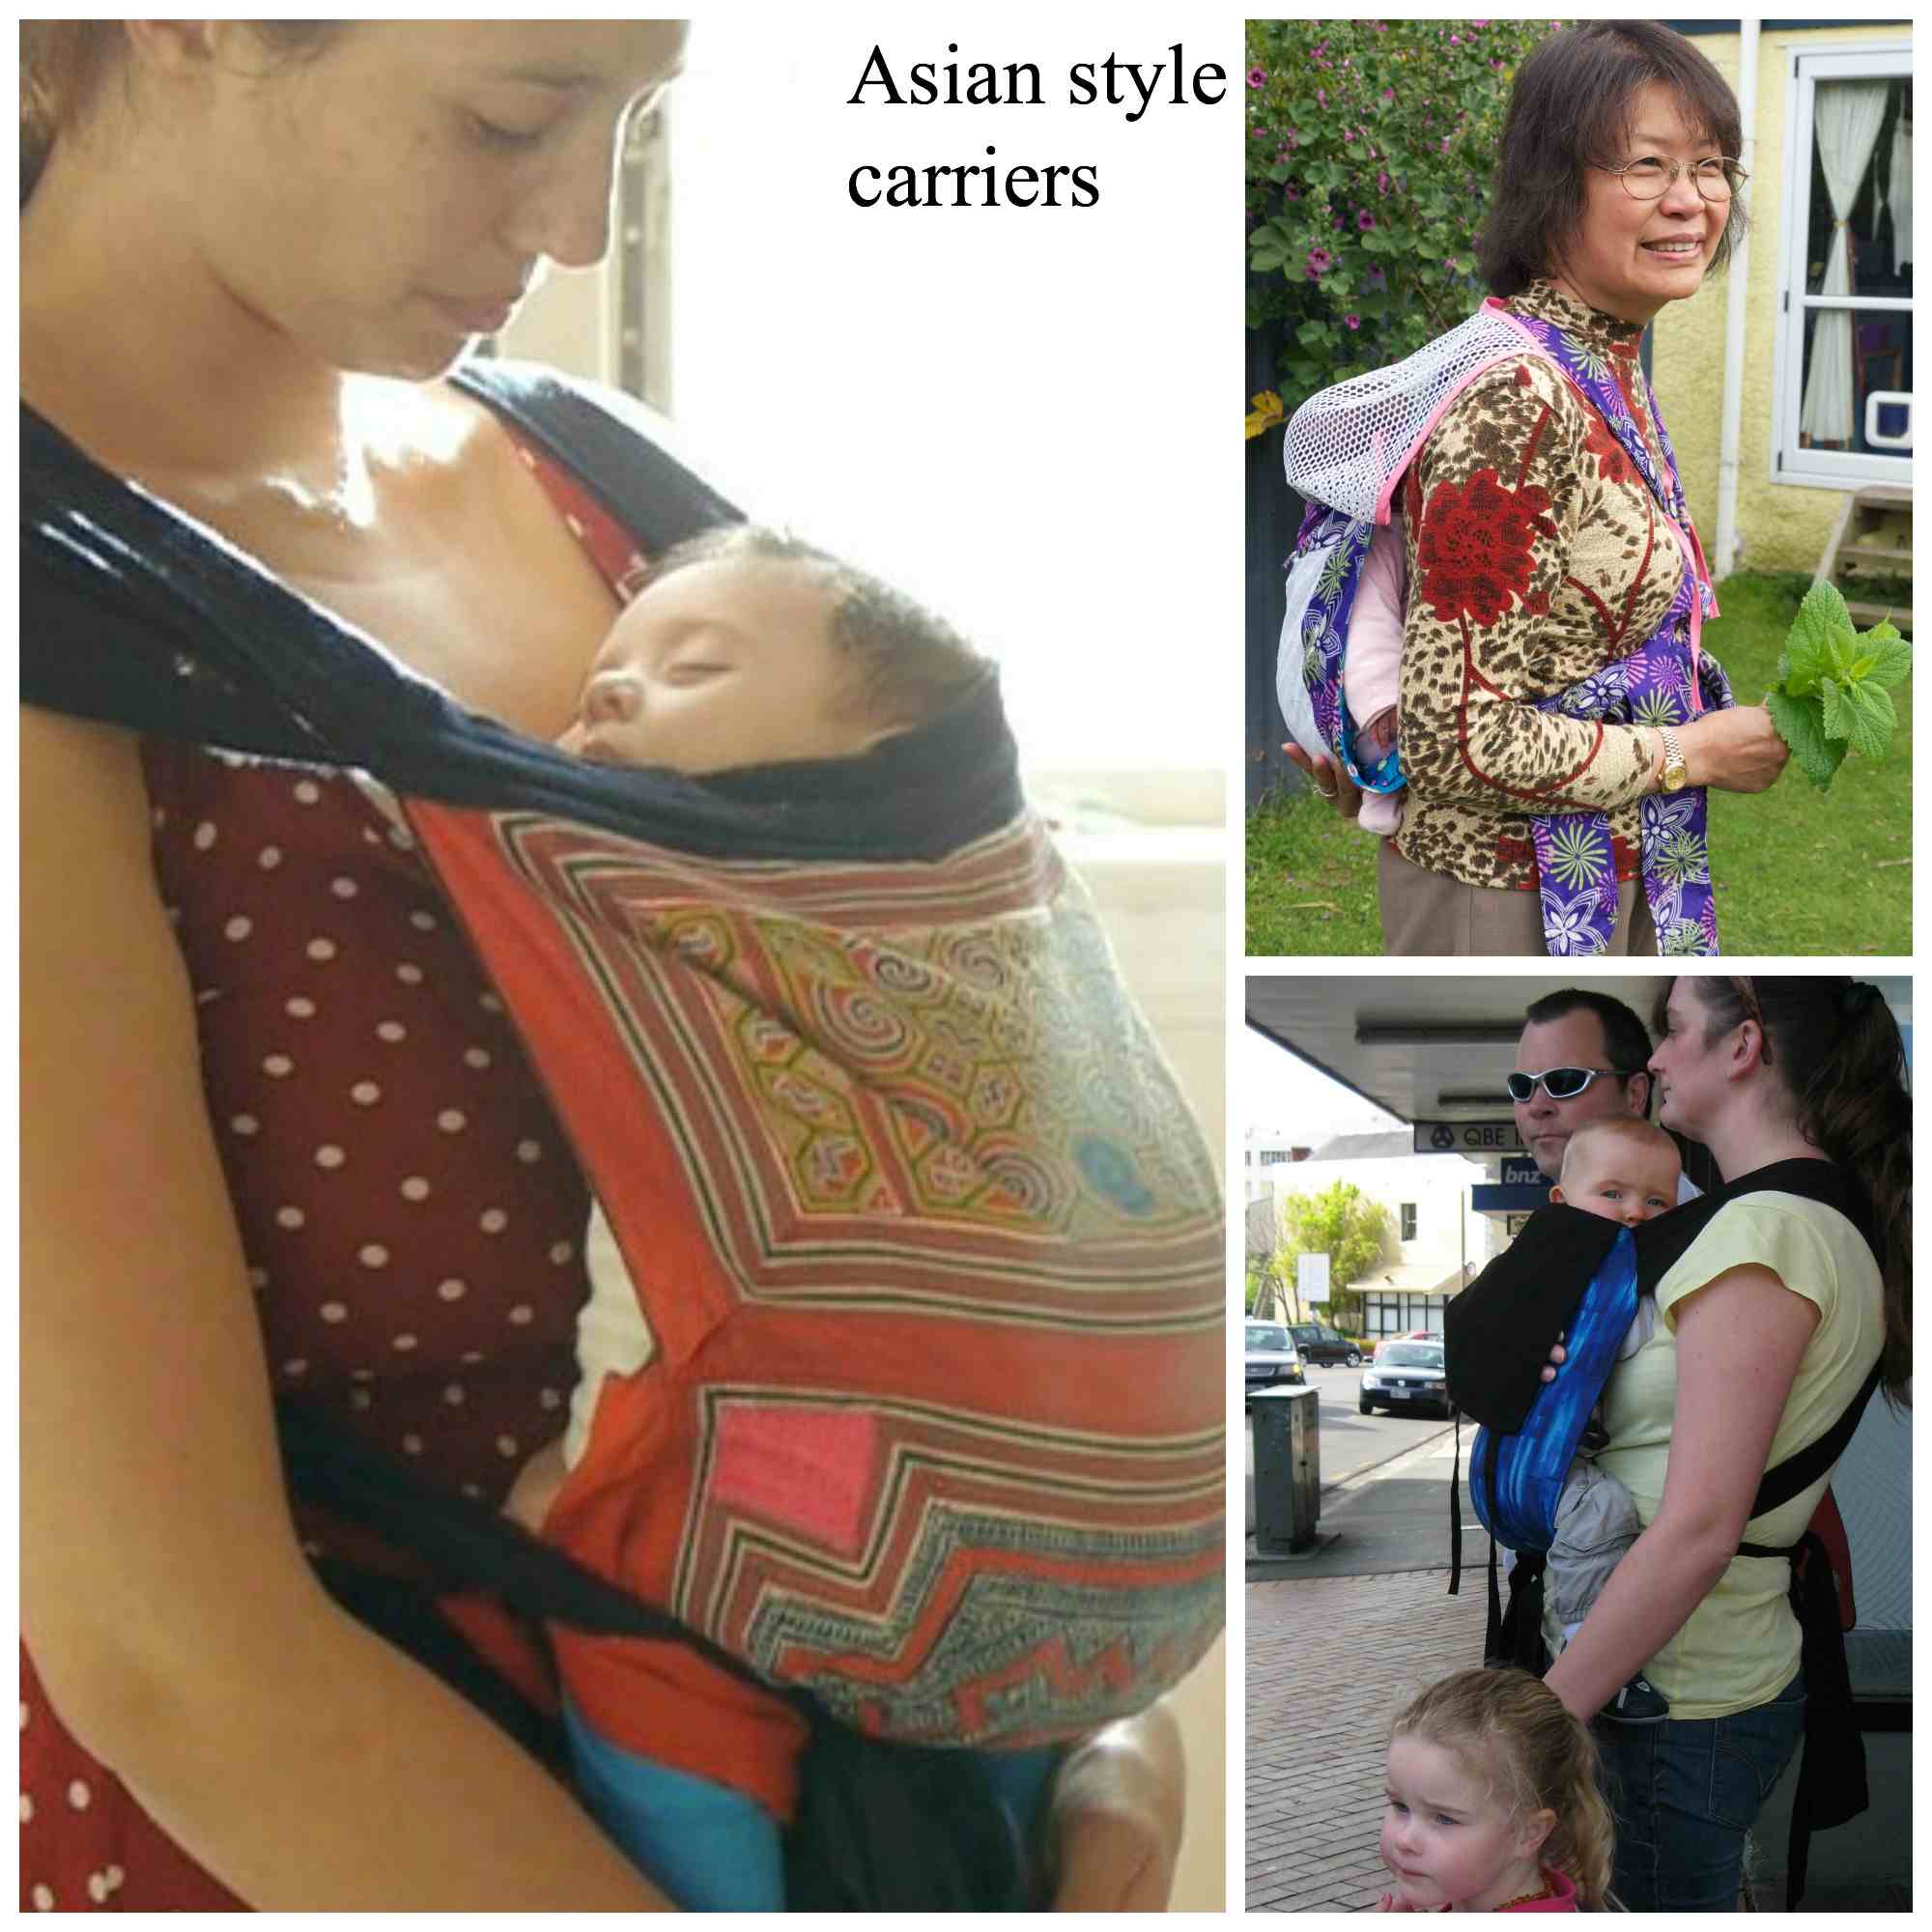 traditional baby carrier